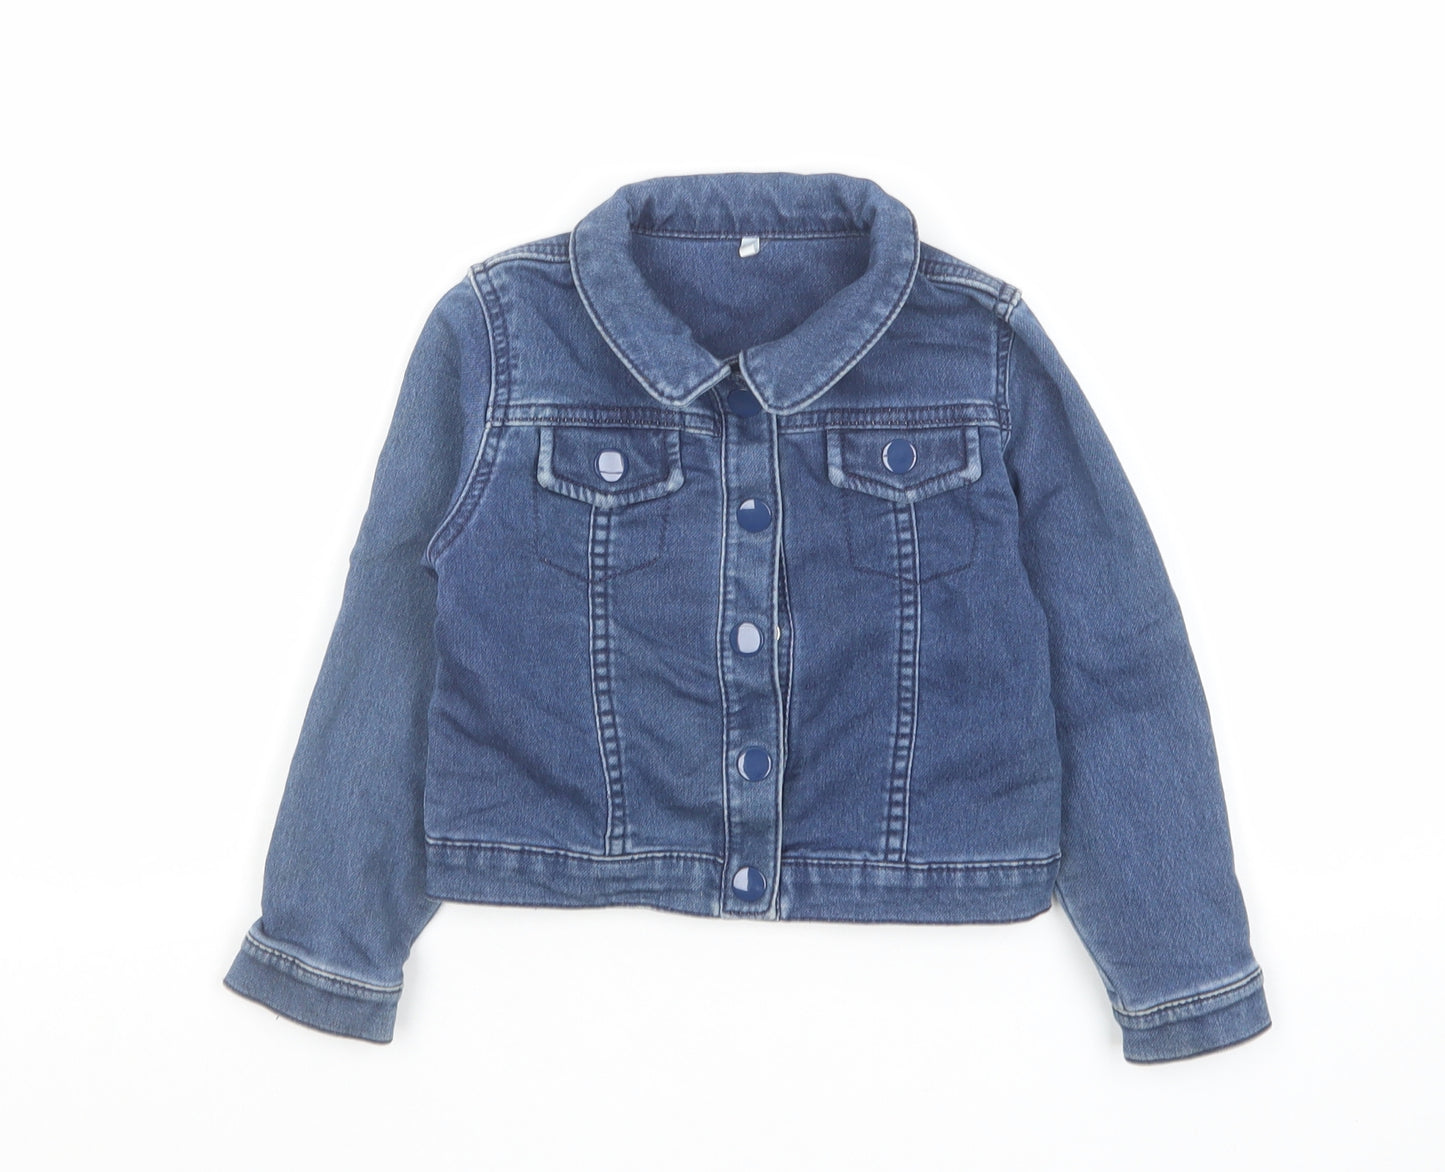 Marks and Spencer Girls Blue Cotton Jacket Size 3-4 Years Button